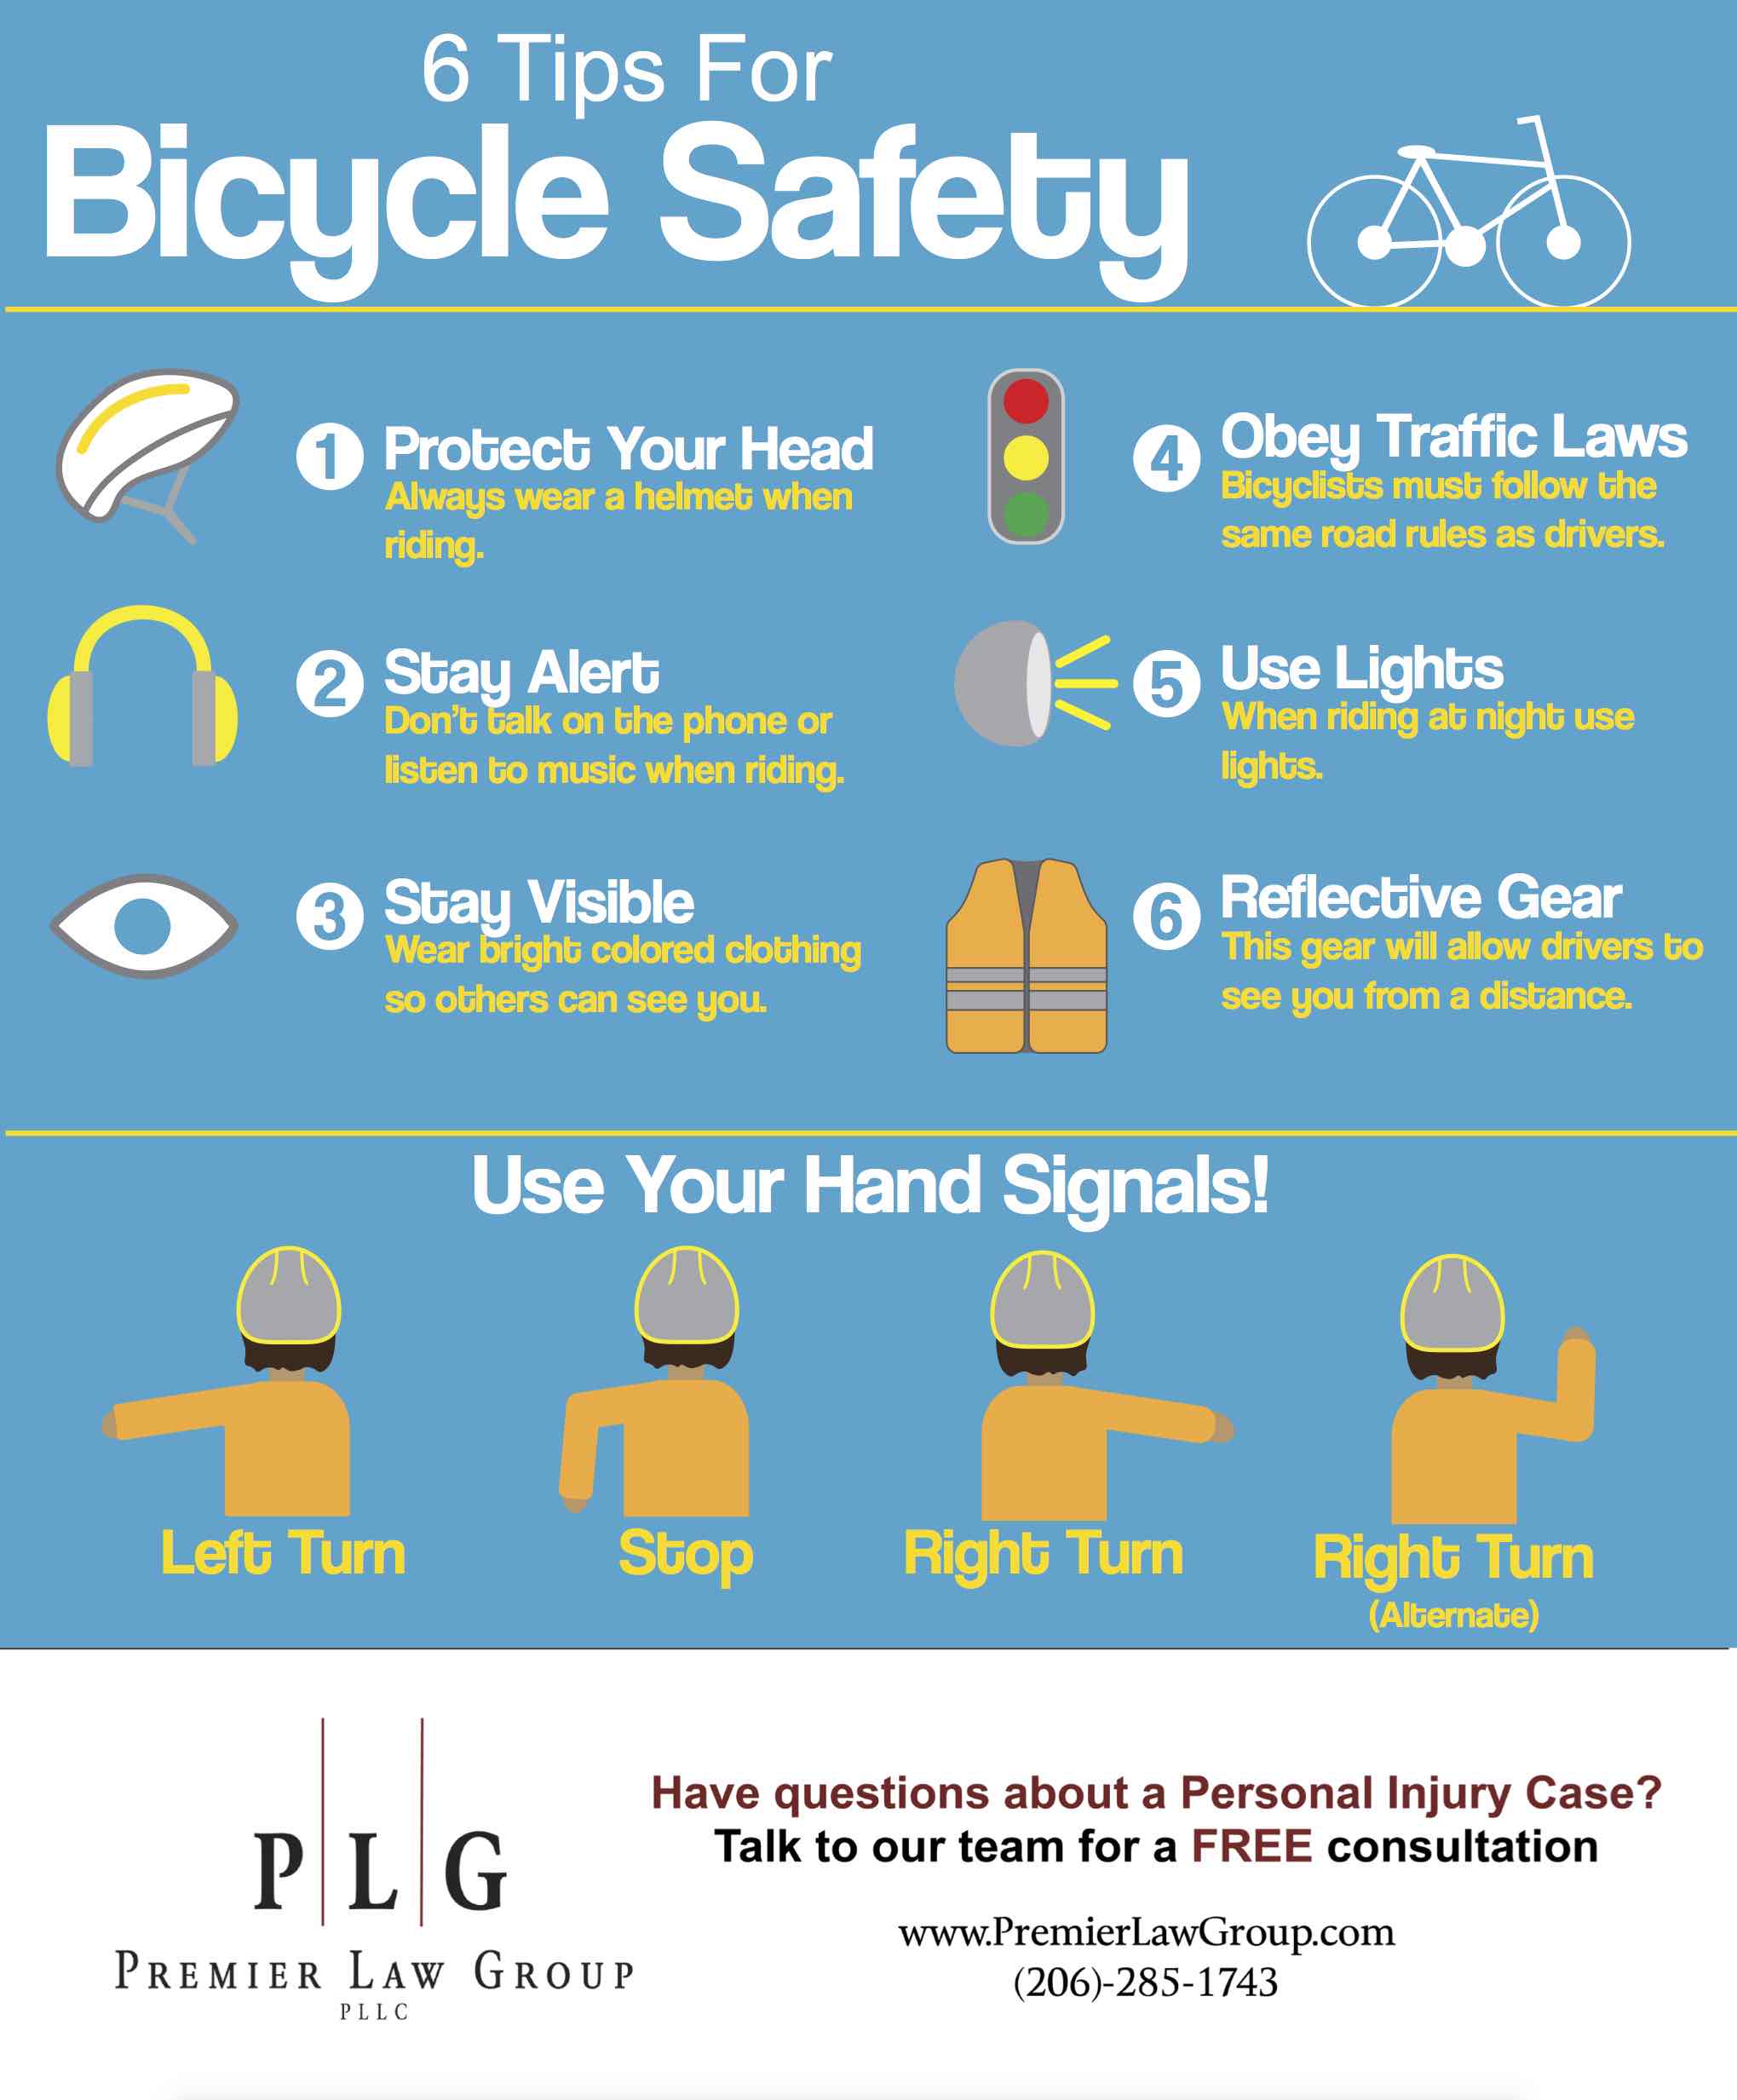 6 Tips For Bicycle Safety - Premier Law Group Tips For Bicycle Safety